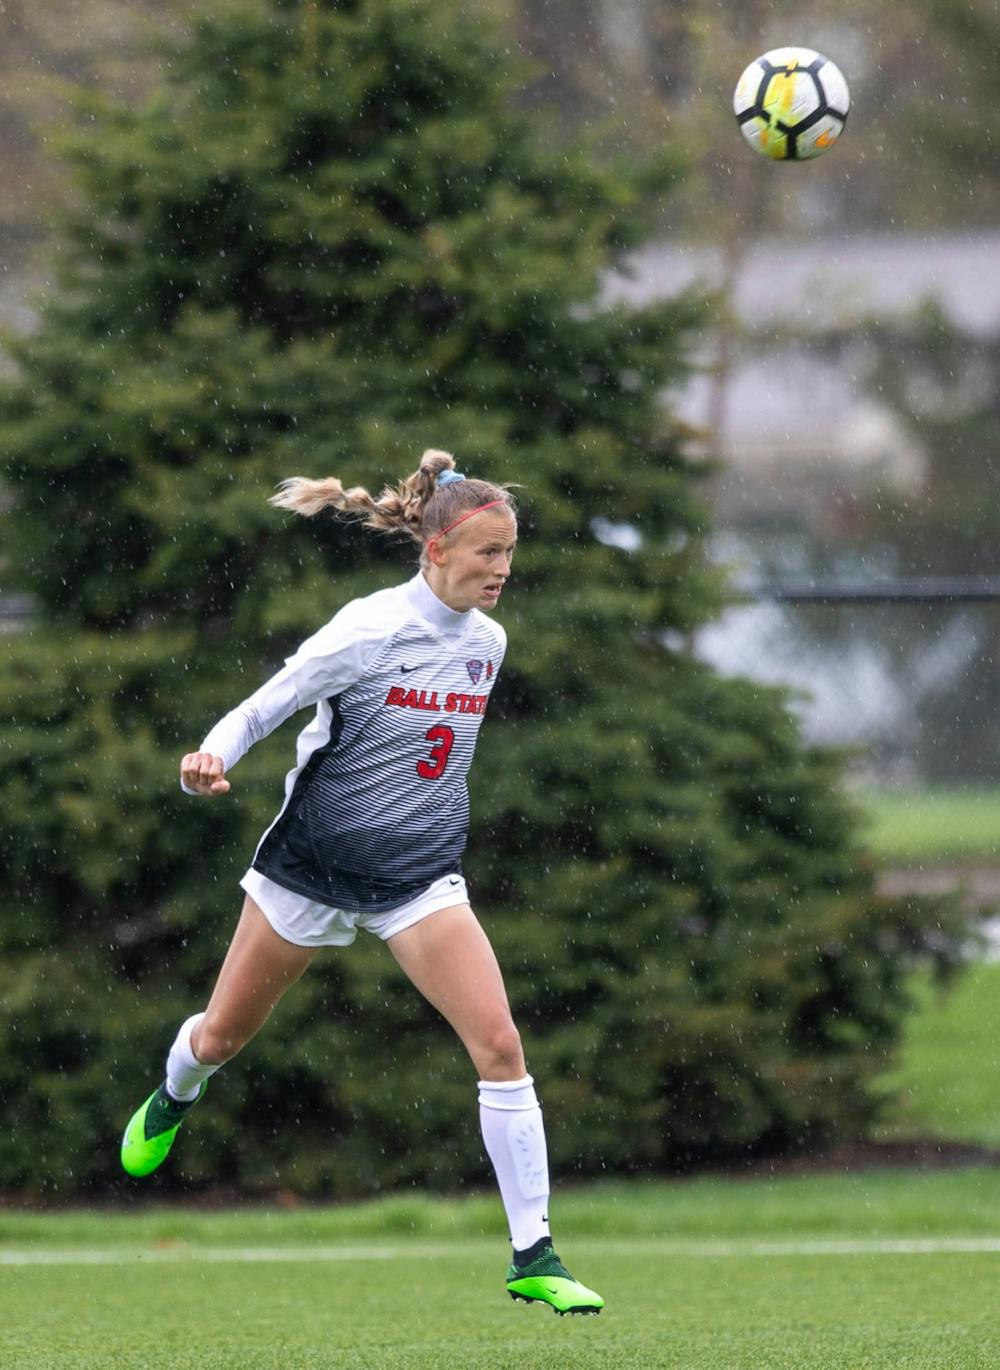 Junior defender Lexy Smith does a header April 11, 2021, at Briner Sports Complex. The Cardinals beat the Eagles 2-1 to become the Mid-American Conference West Division champions. Jaden Whiteman, DN